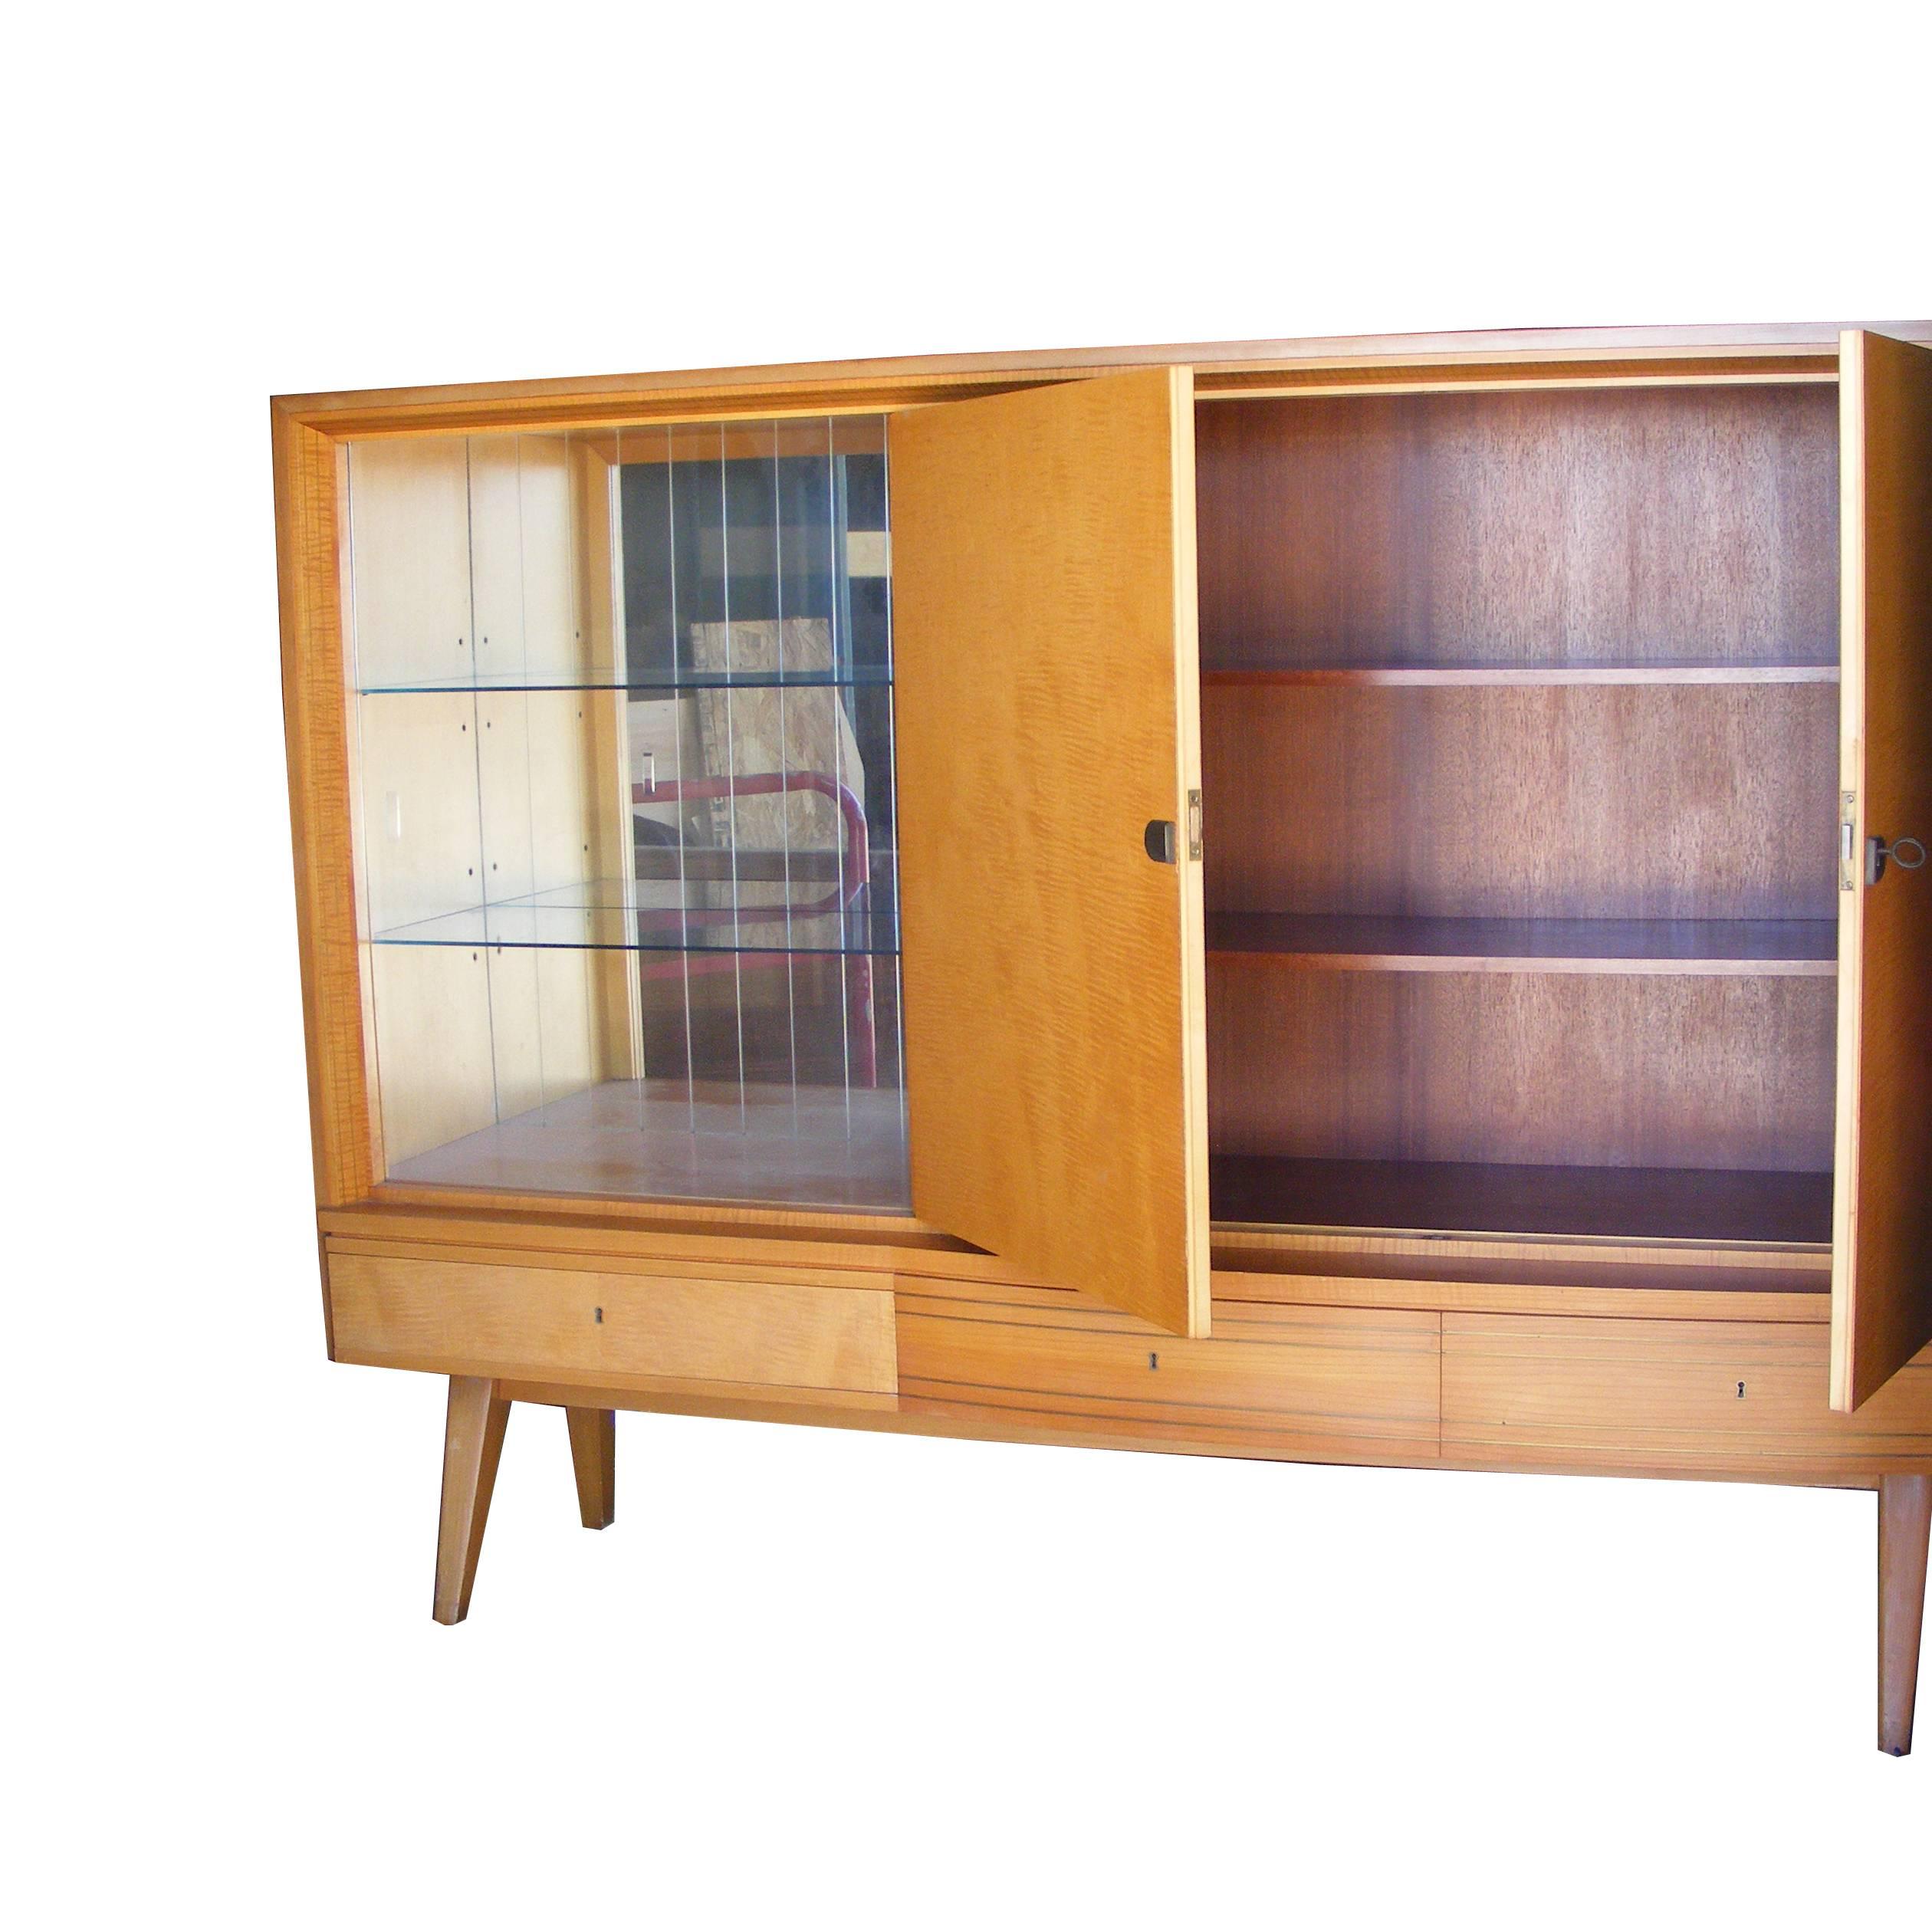 Lovely example of Mid-Century German design. Maple exterior with mahogany interiors. Can be used as bar cabinet with lots of storage. Open glass shelving with mirrored back. Two door cabinet opens to two shelves. Three locking drawers at base with